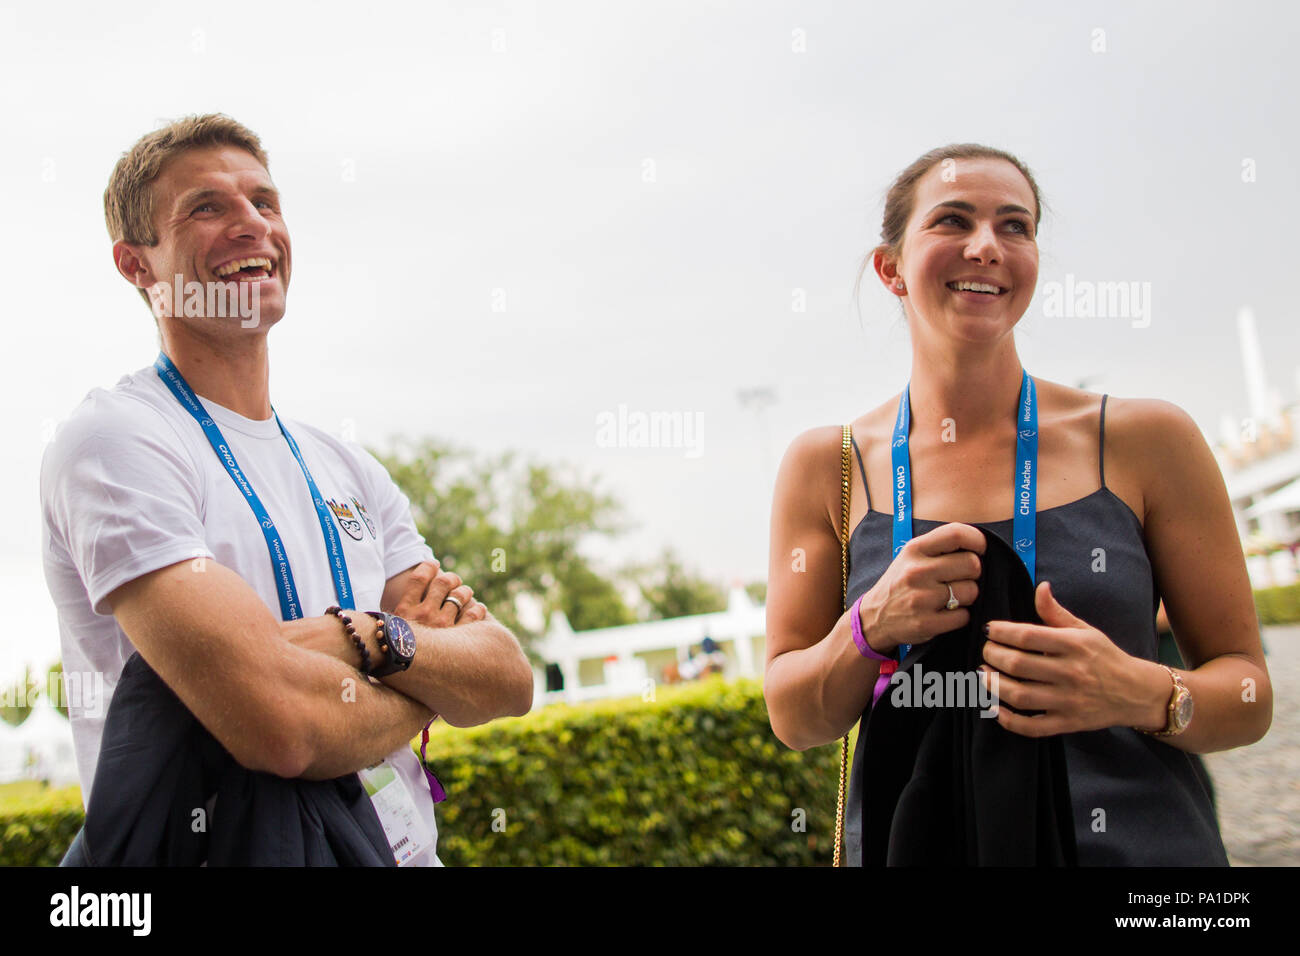 20 July 2018, Germany, Aachen, CHIO, Equestrian Sports, North-Rhine Palatinate Prize: German national soccer player Thomas Mueller (L) and his wife conversing during the event. Photo: Rolf Vennenbernd/dpa Stock Photo